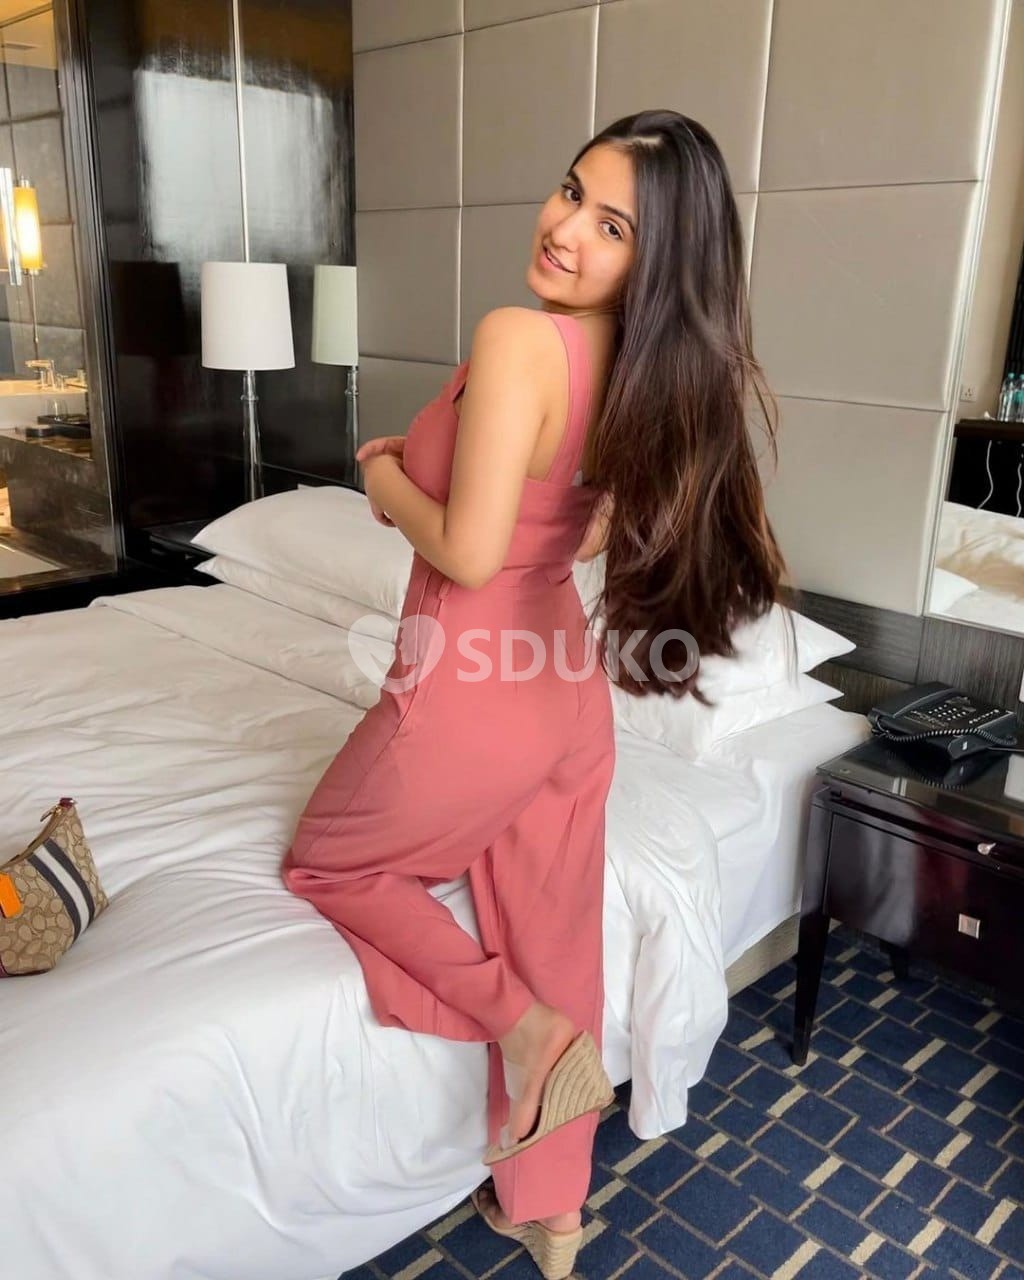 BATHINDA THE ROYAL ESCORT - HARD SEX 100% SAFE AND SECURE DOORSTEP OUTCALL AND INCALL AVAILABLE IN